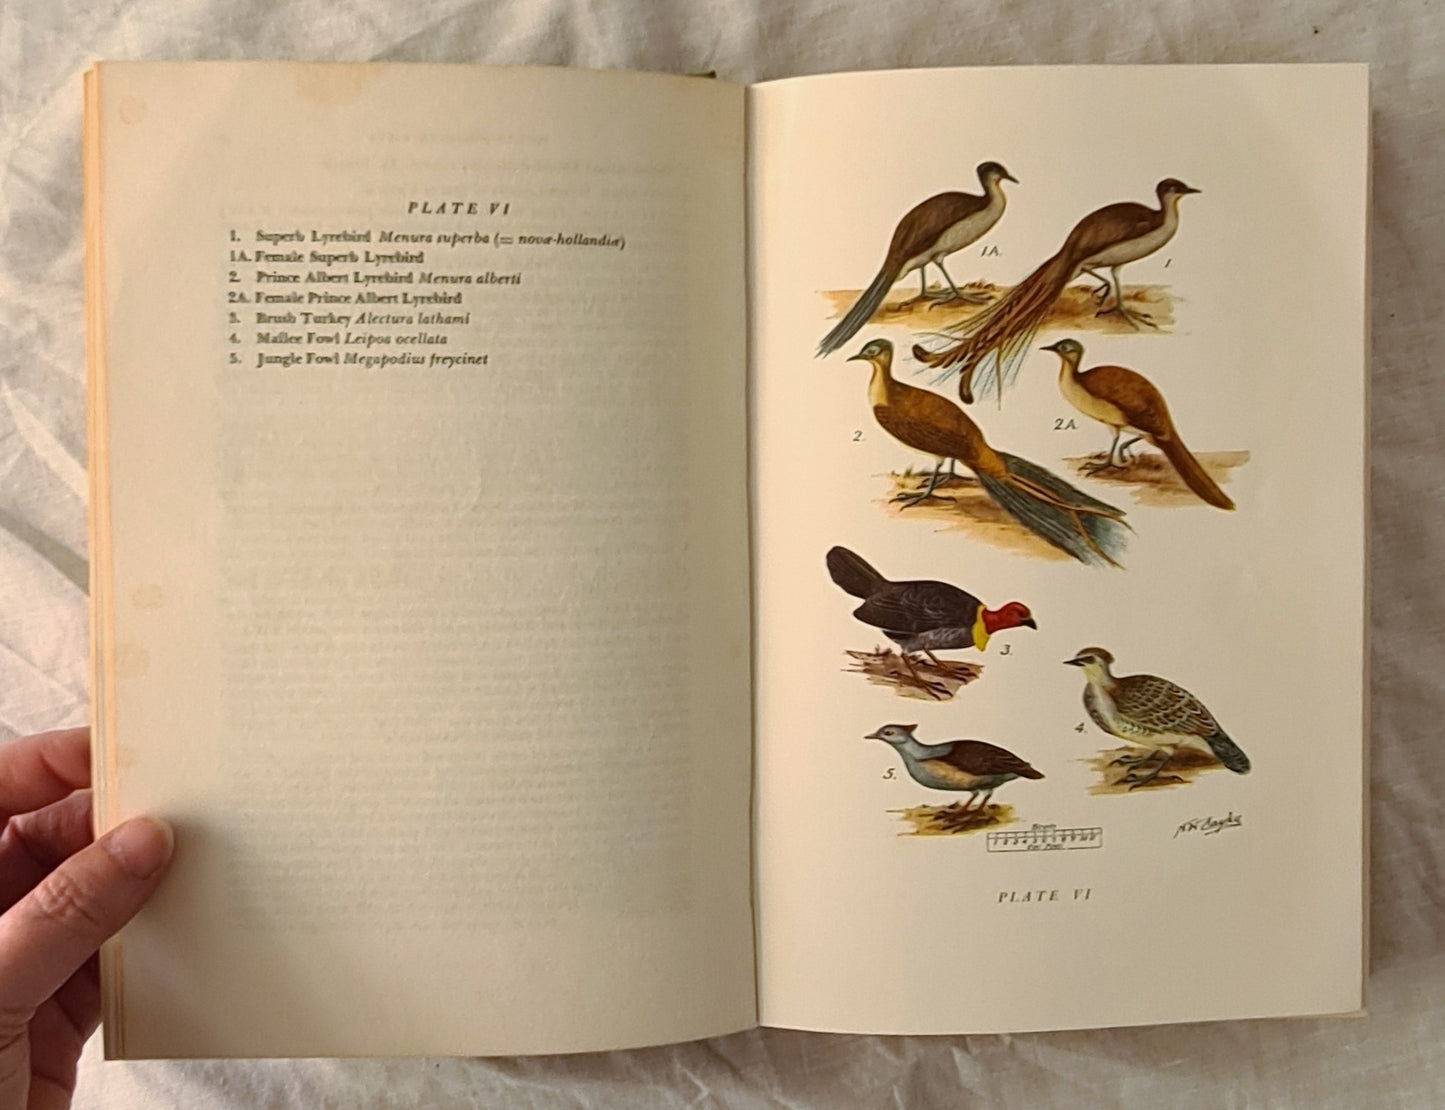 What Bird is That? by Neville W. Cayley